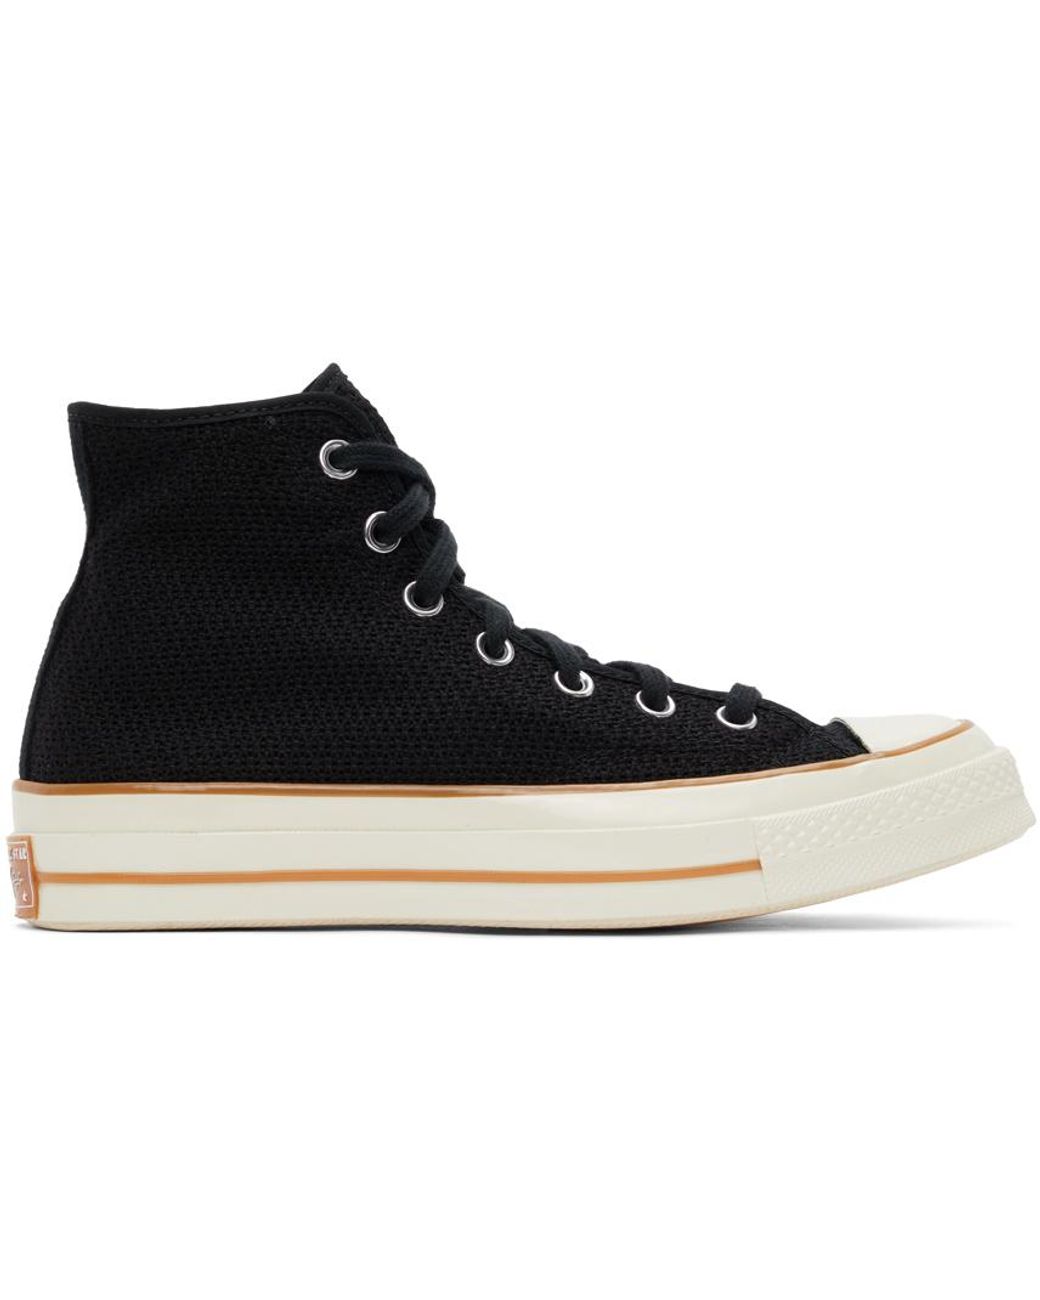 Converse Breathable Chuck 70 High Sneakers in Black for Men - Lyst